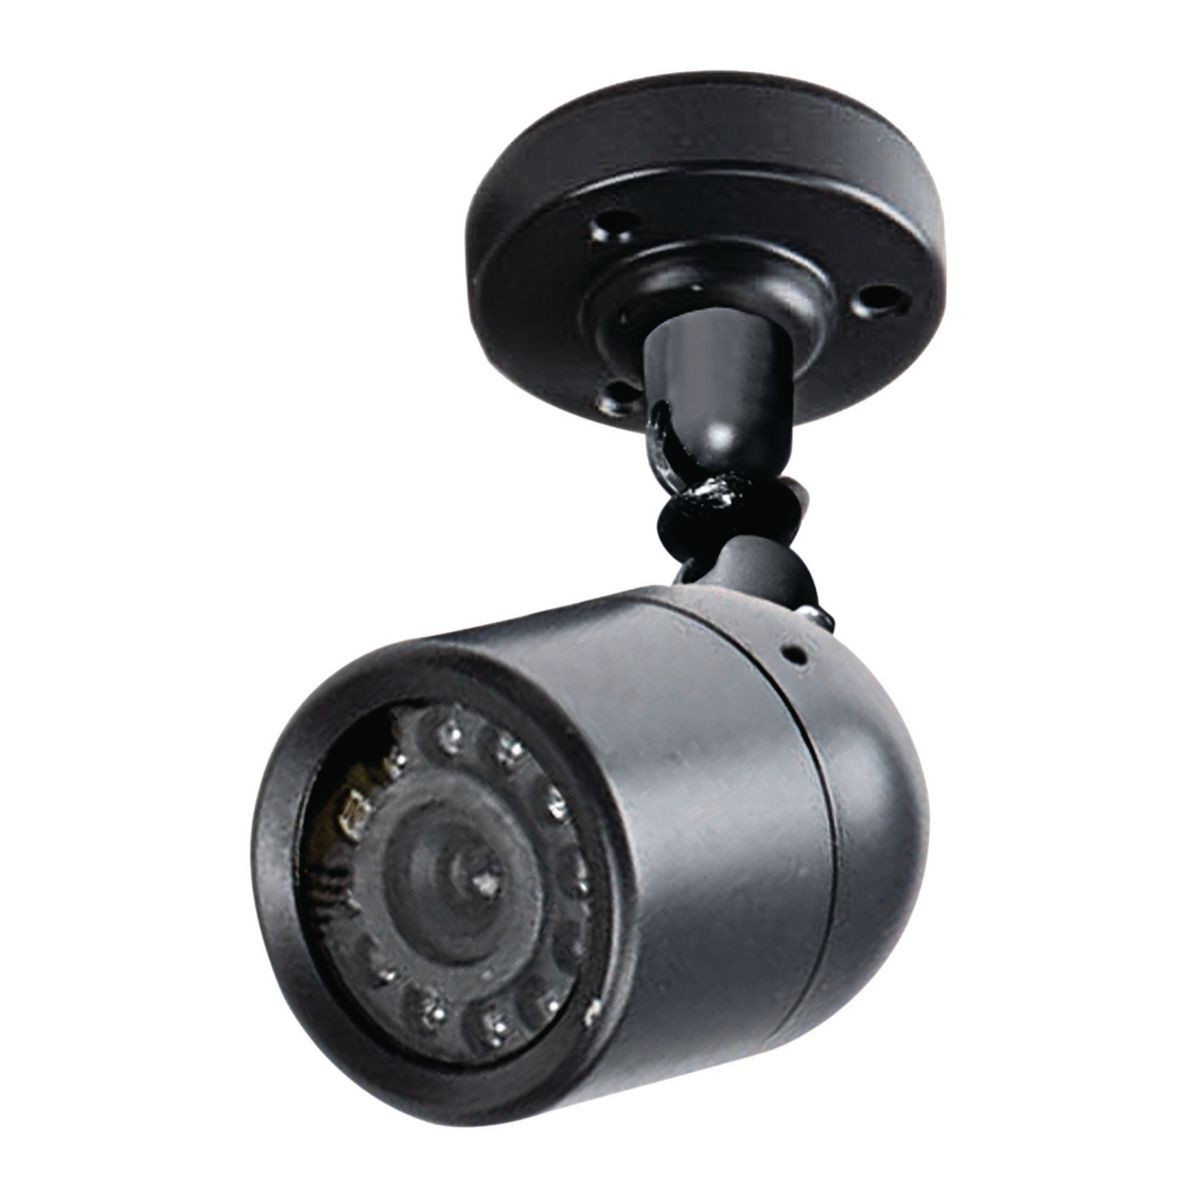 bunker hill wireless security camera 62367 harbor freight